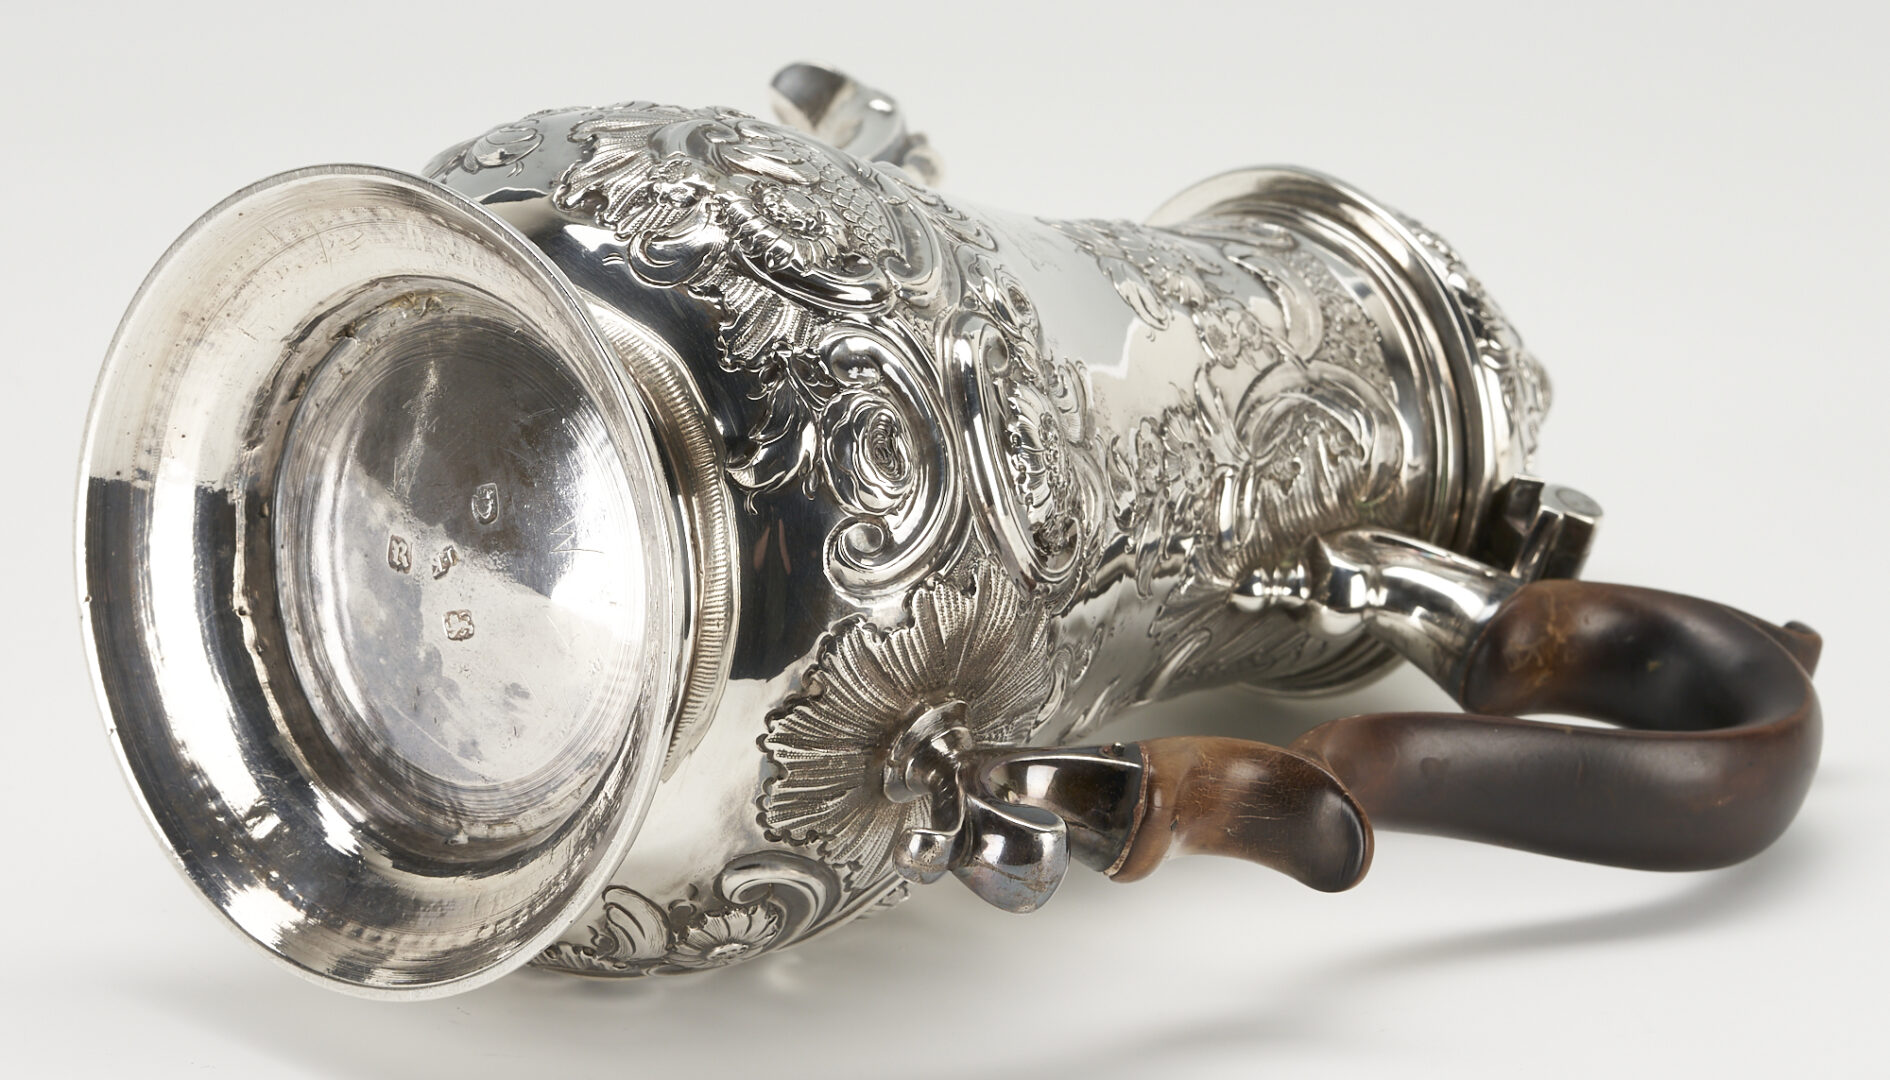 Lot 53: George III Sterling Silver Armorial Coffee Pot c. 1772